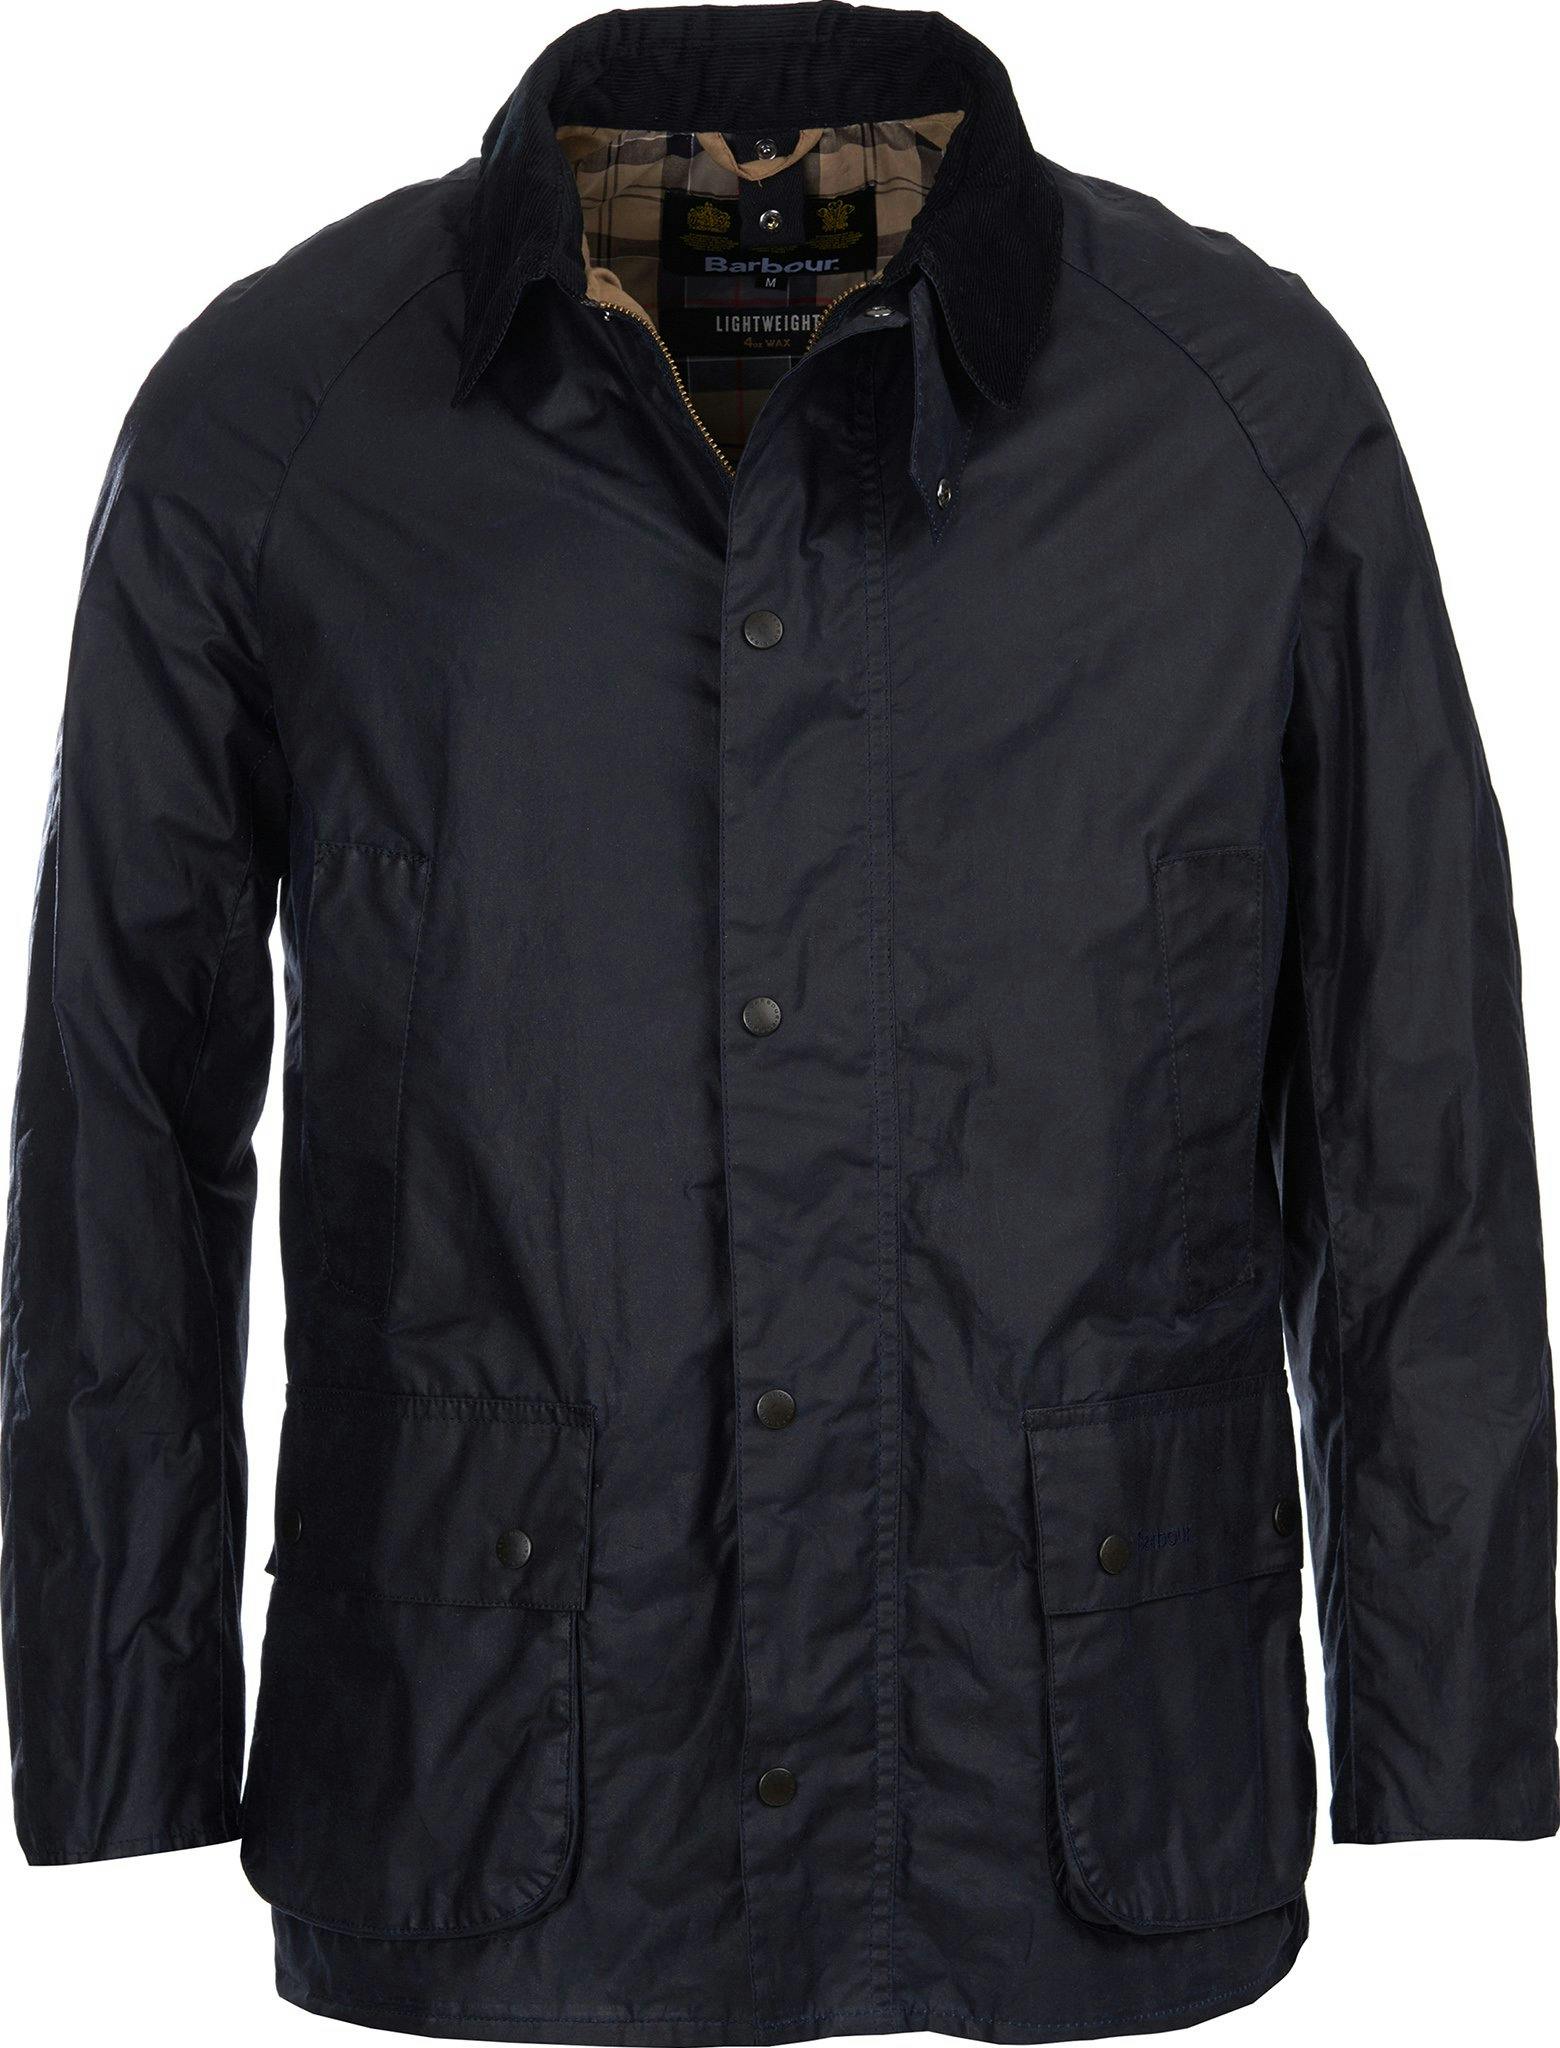 Product image for Ashby Lightweight Wax Jacket - Men's